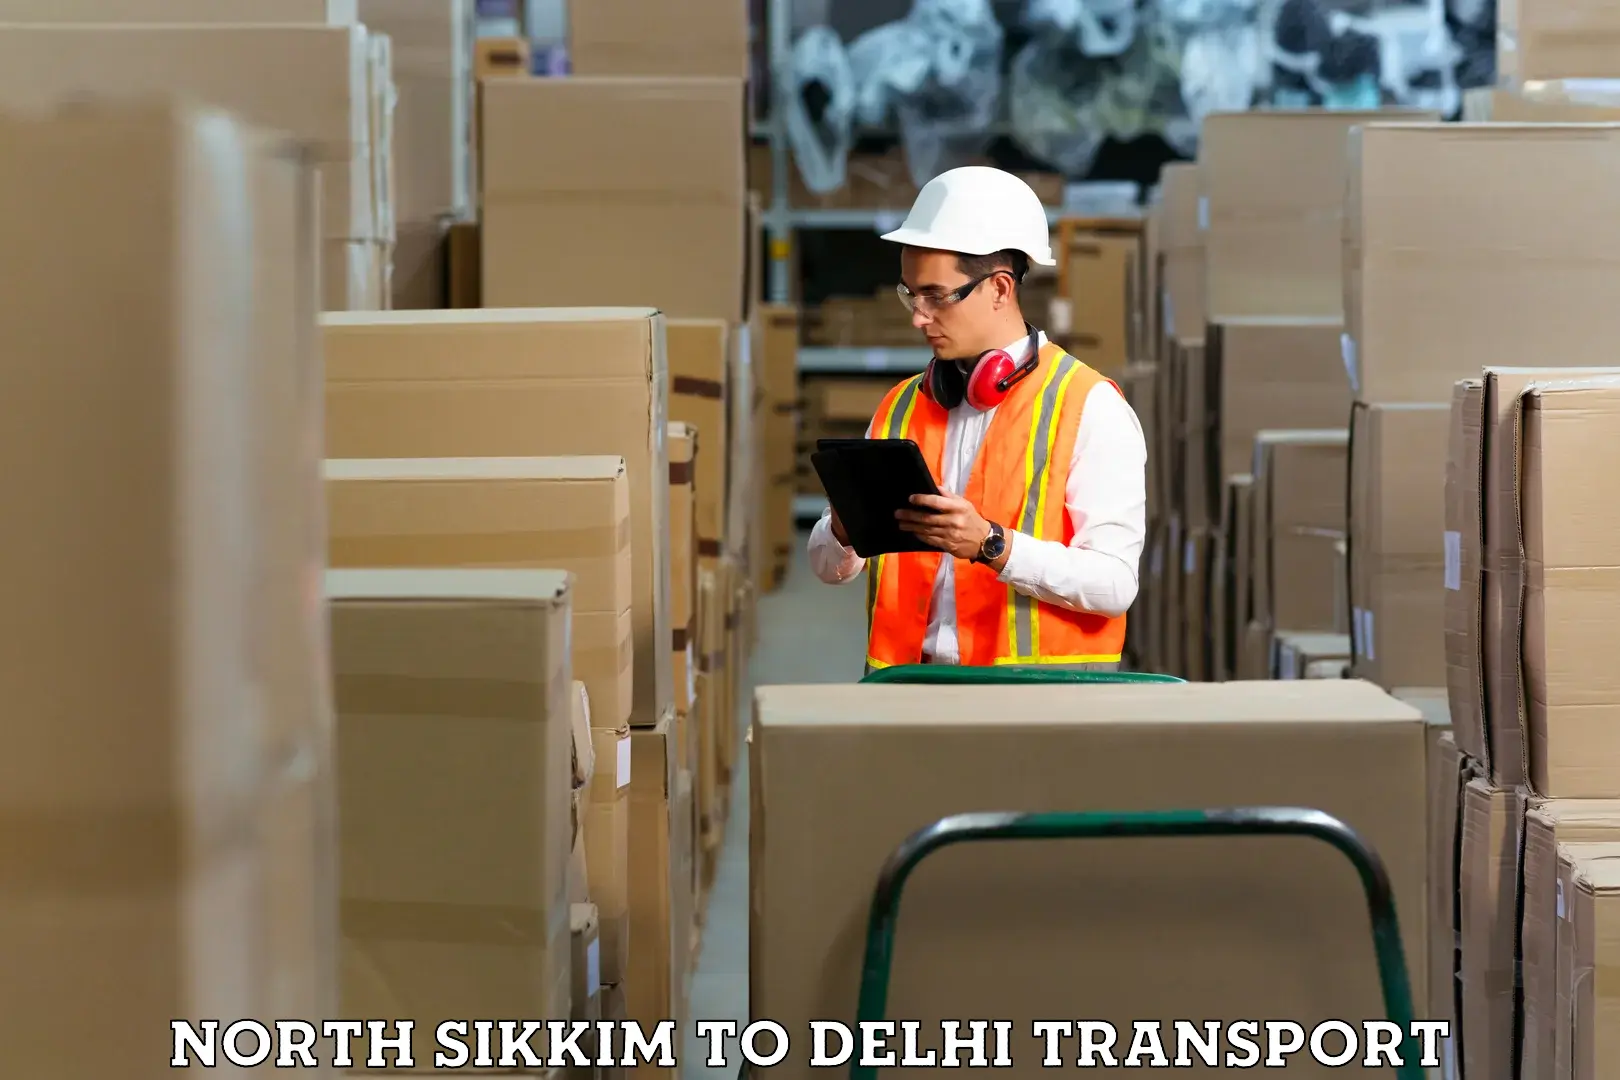 Container transport service North Sikkim to East Delhi